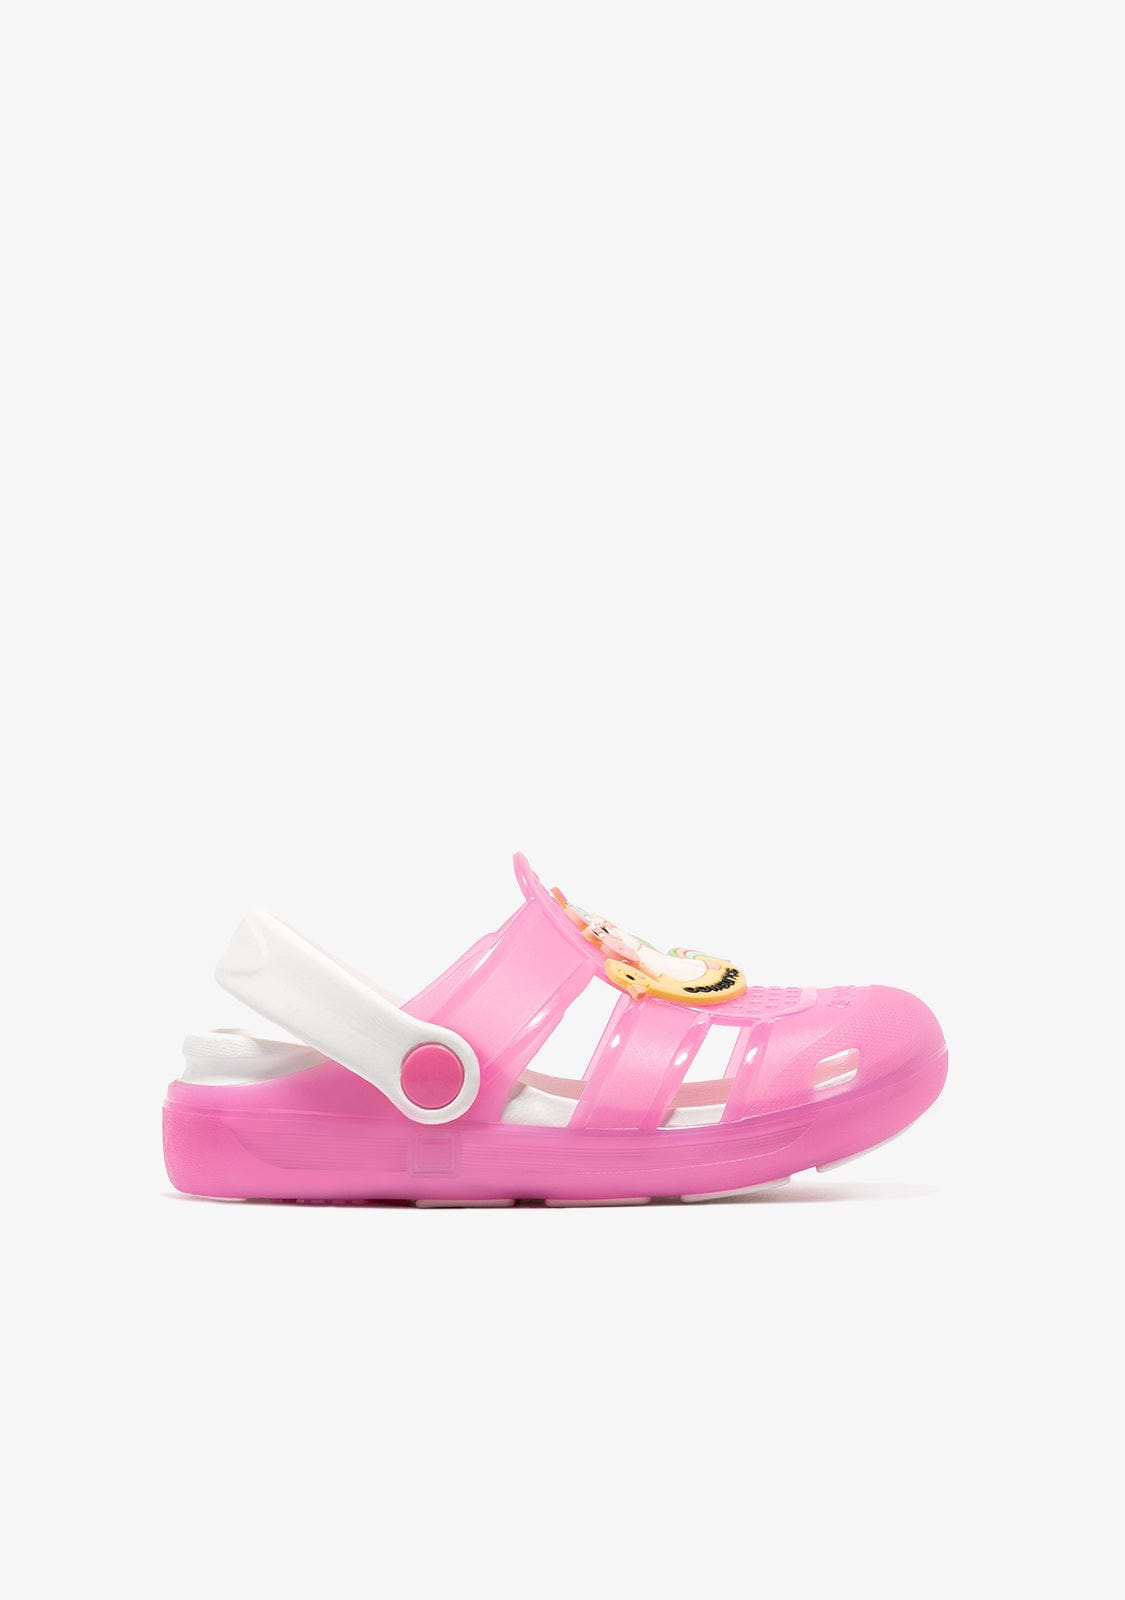 CONGUITOS Shoes Girl's Pink With Lights Clogs Rubber